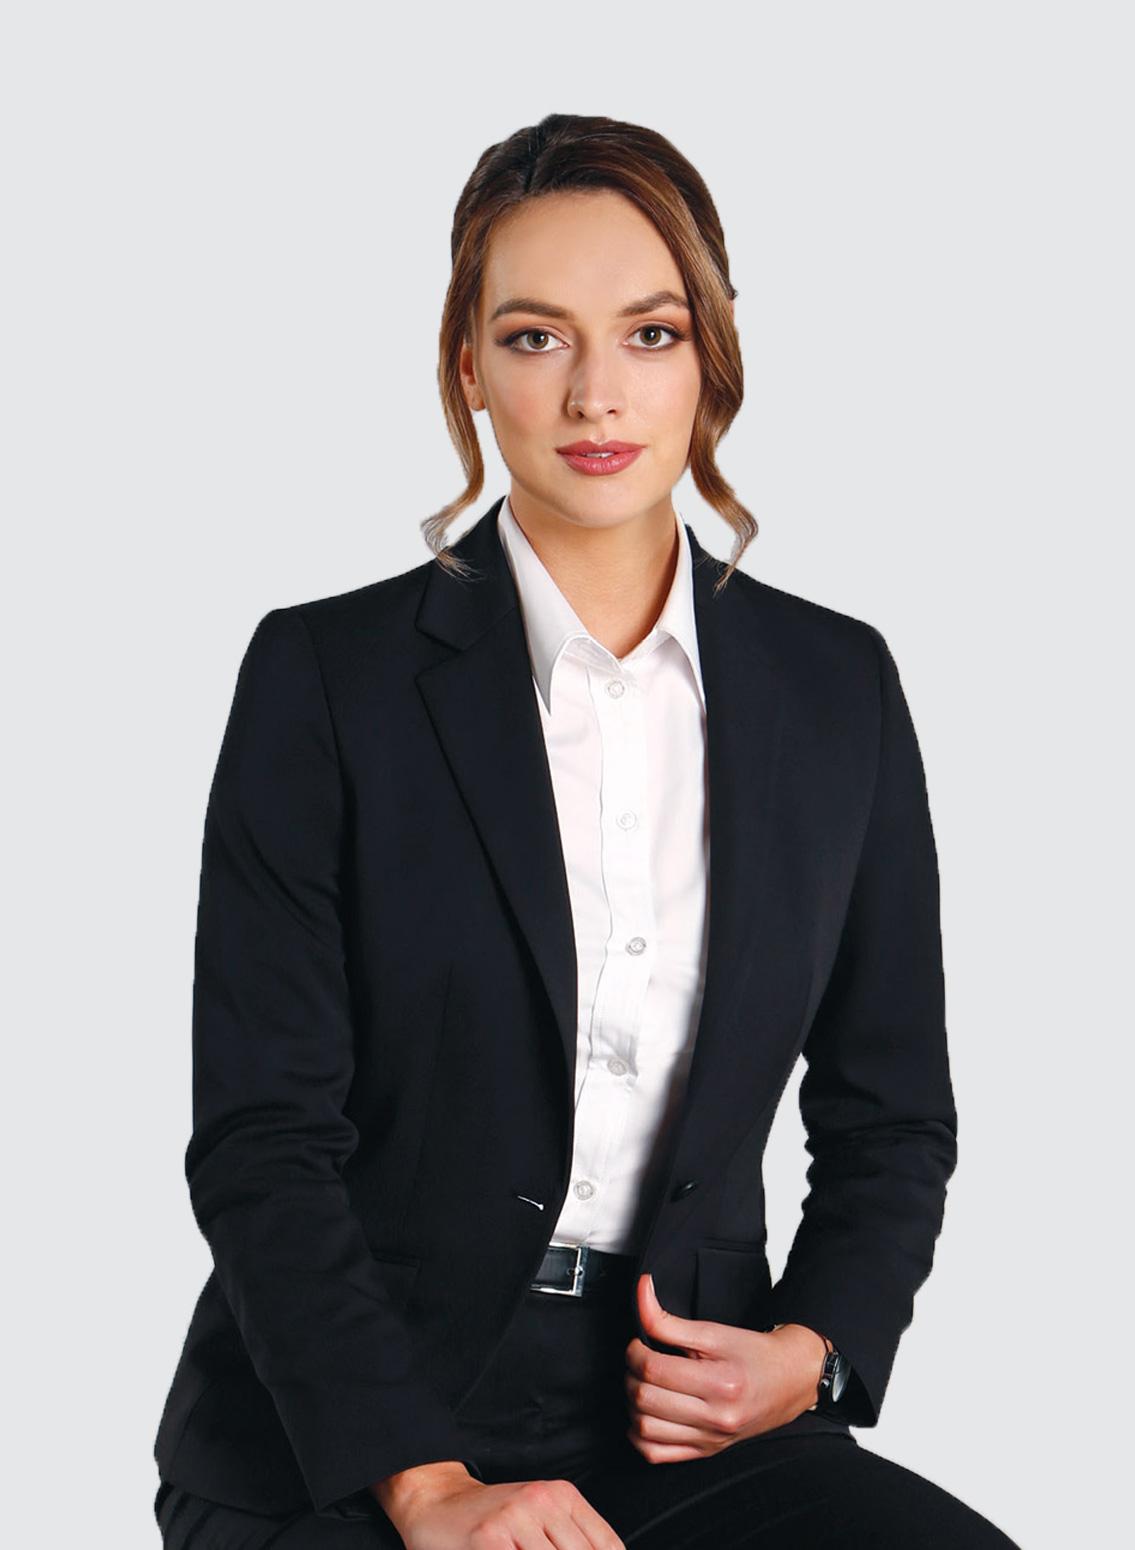 M9201 Ladies’ Wool Blend Stretch One Button Cropped Jacket